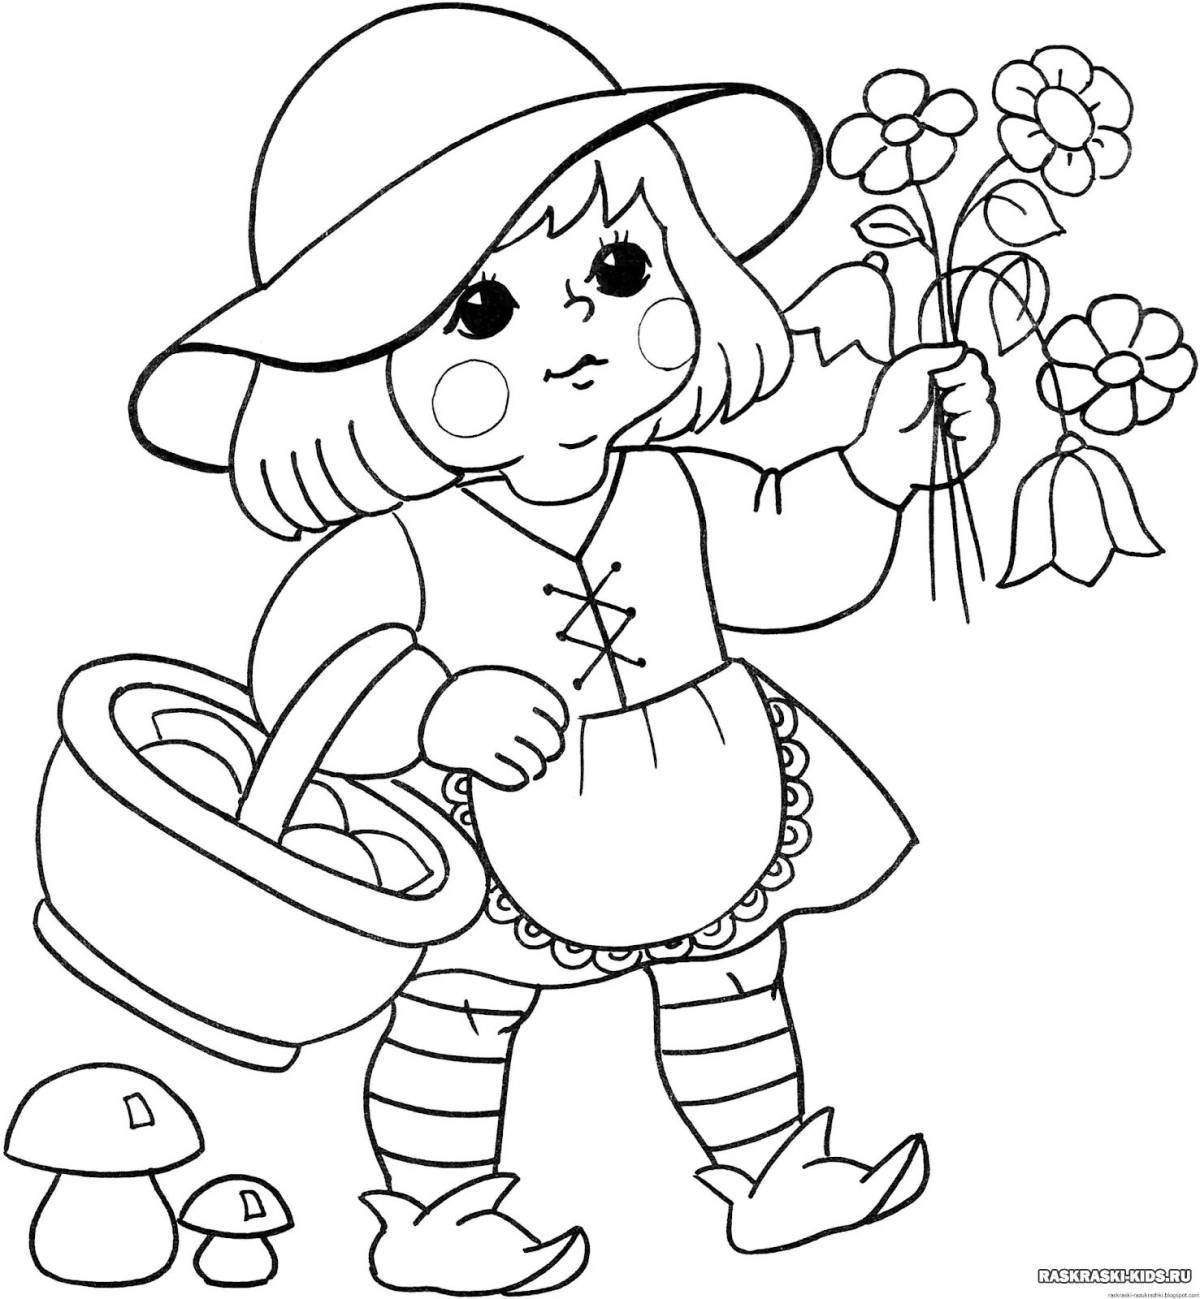 Cute coloring book for girls 3-4 years old